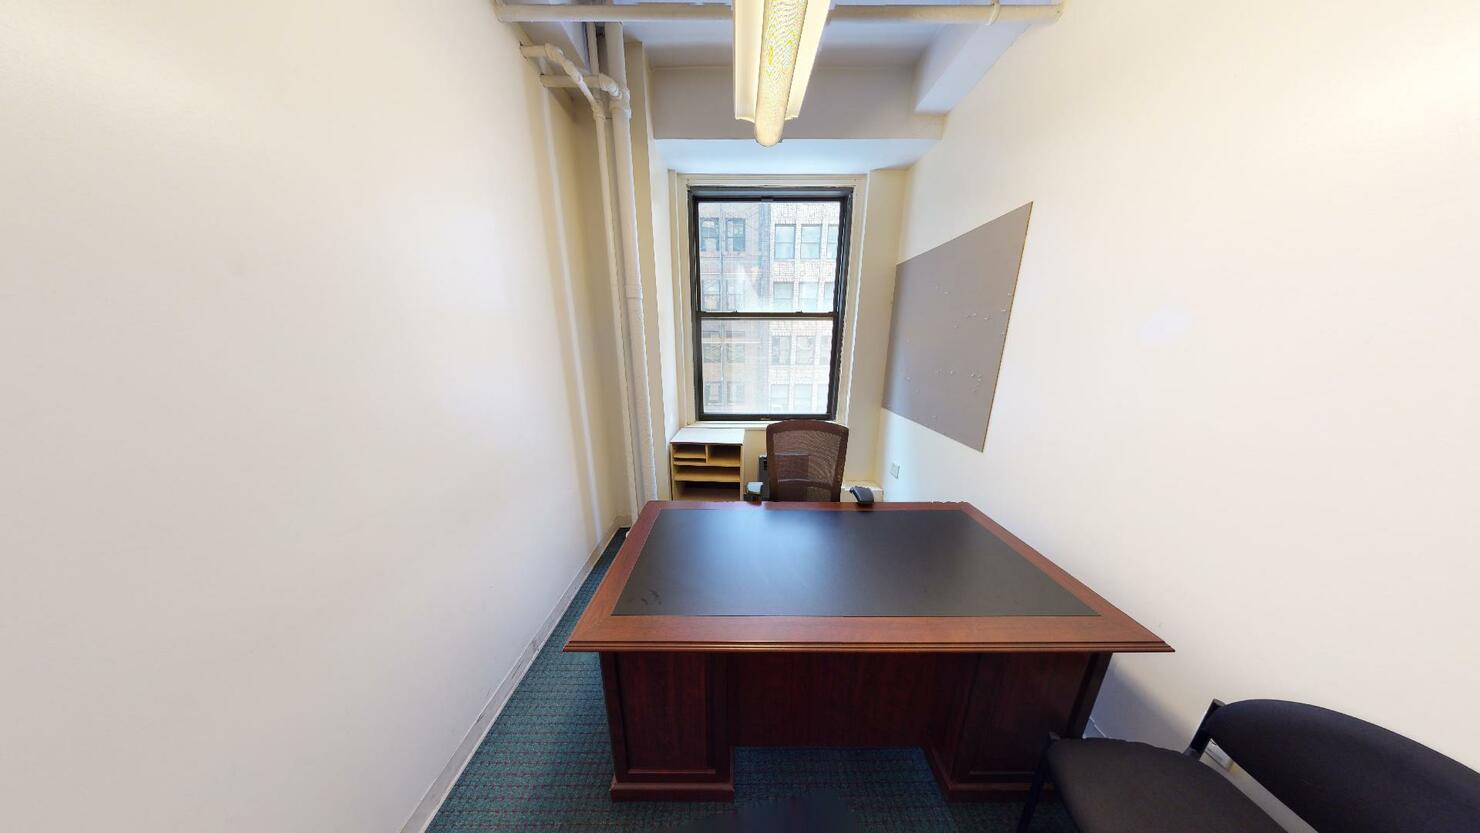 247 West 35th Street Office Space - small private office room with a desk and two chairs